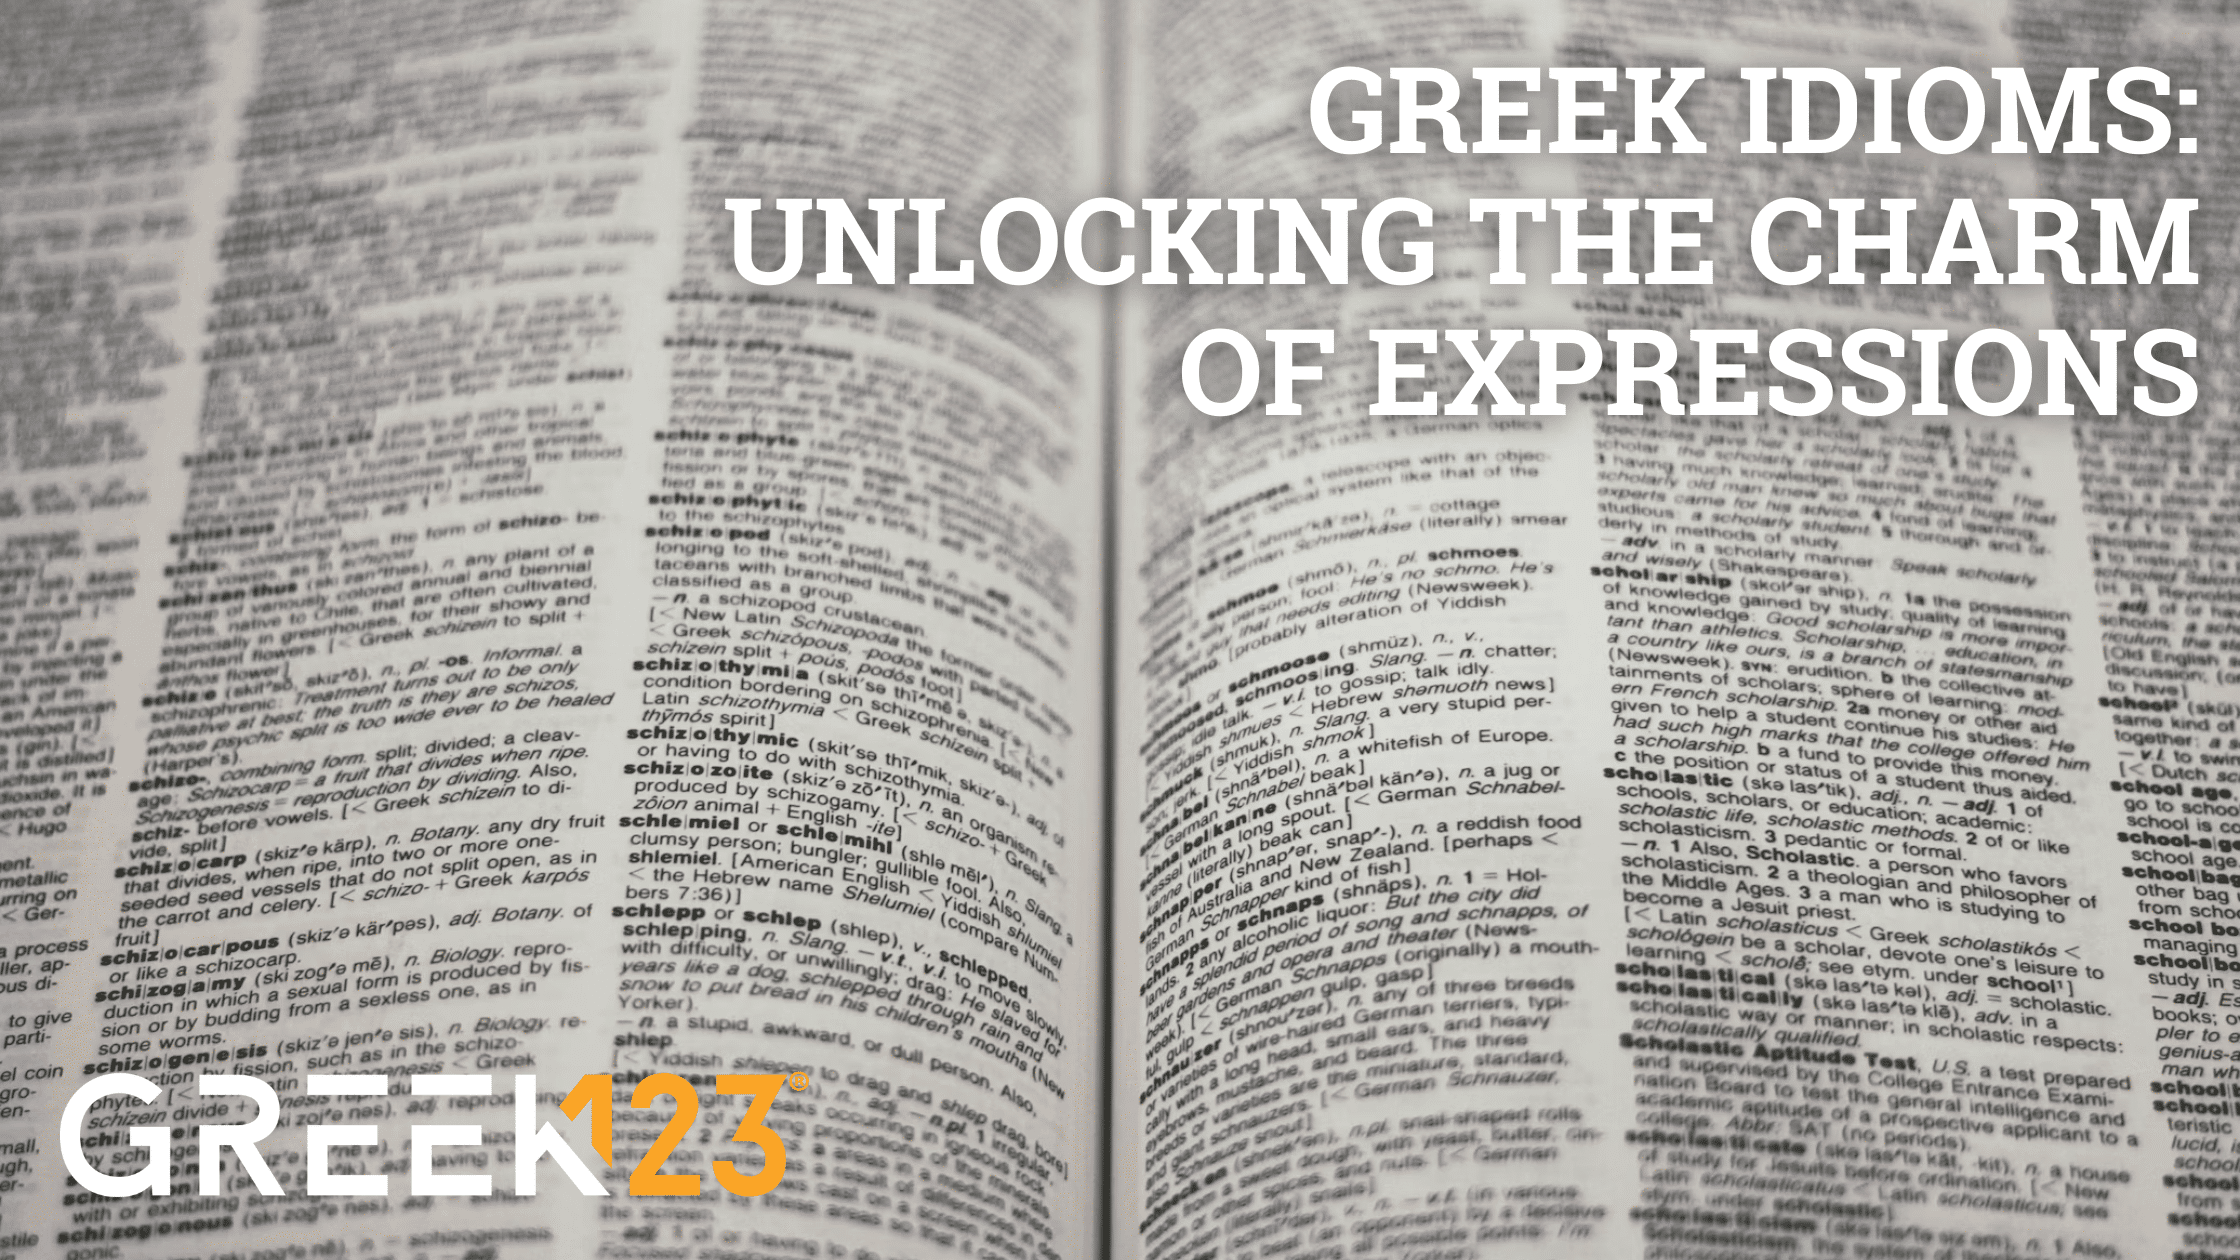 Greek Idioms: Unlocking the Charm of Expressions